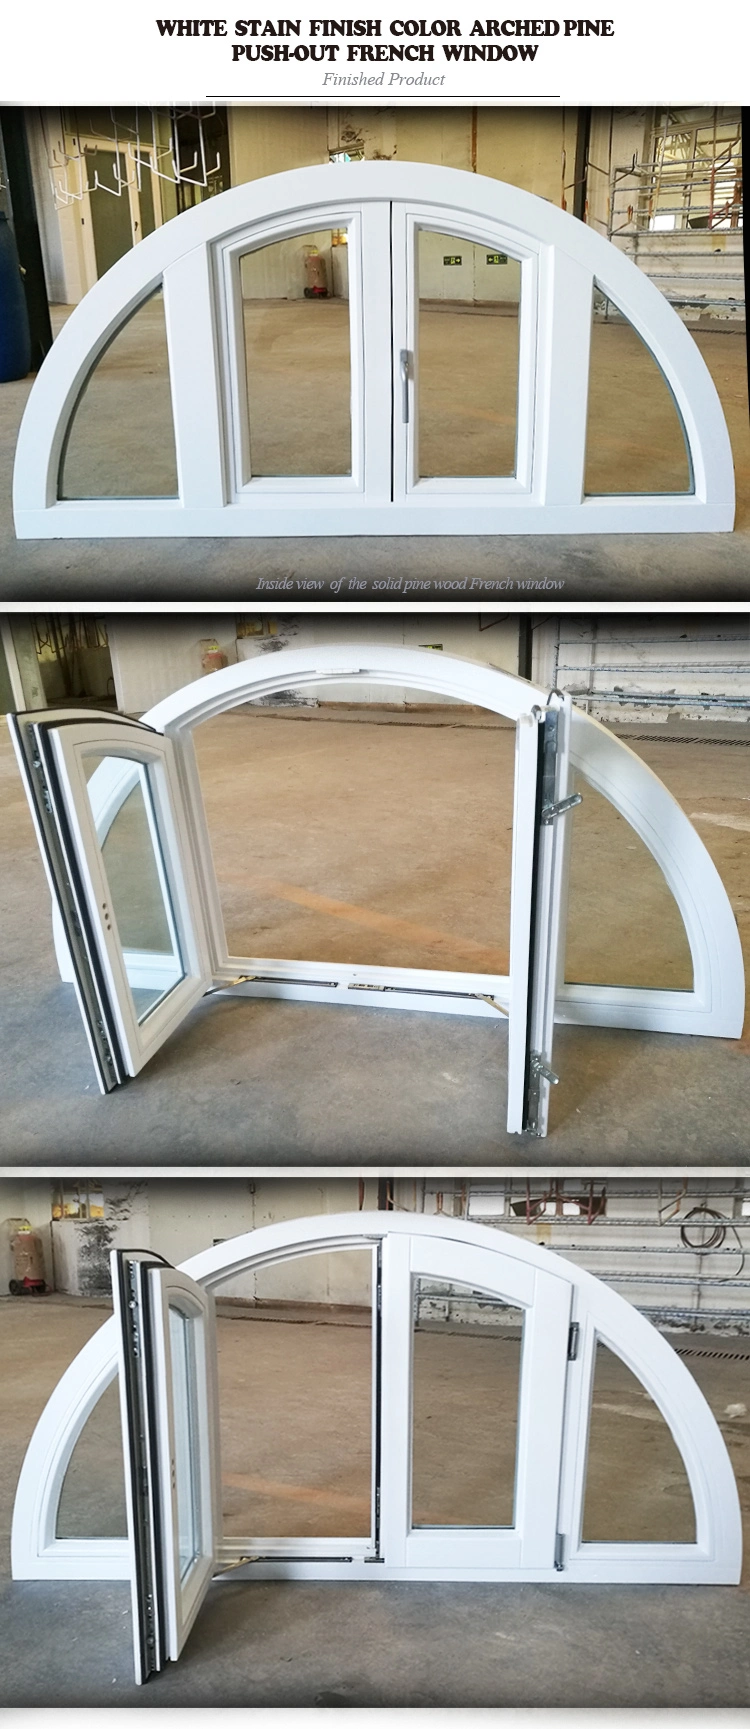 Heat-Insulation Aluminum Arched Windows for House